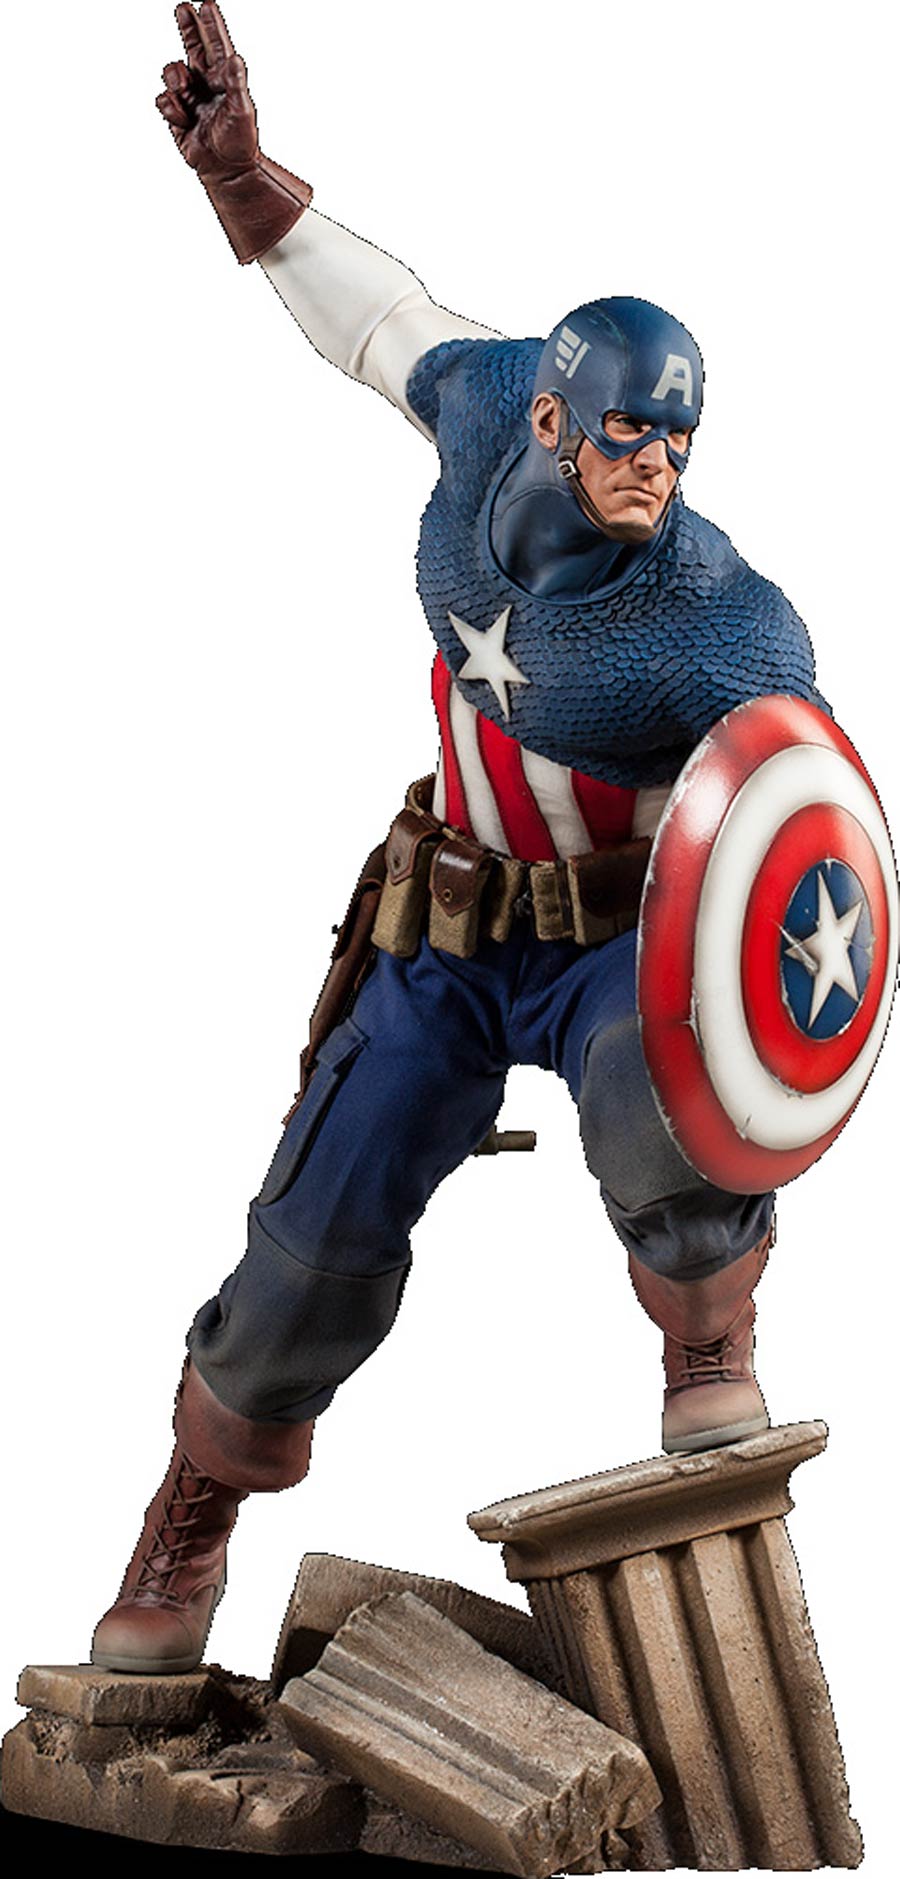 Captain America Allied Charge On Hydra Premium Format Figure